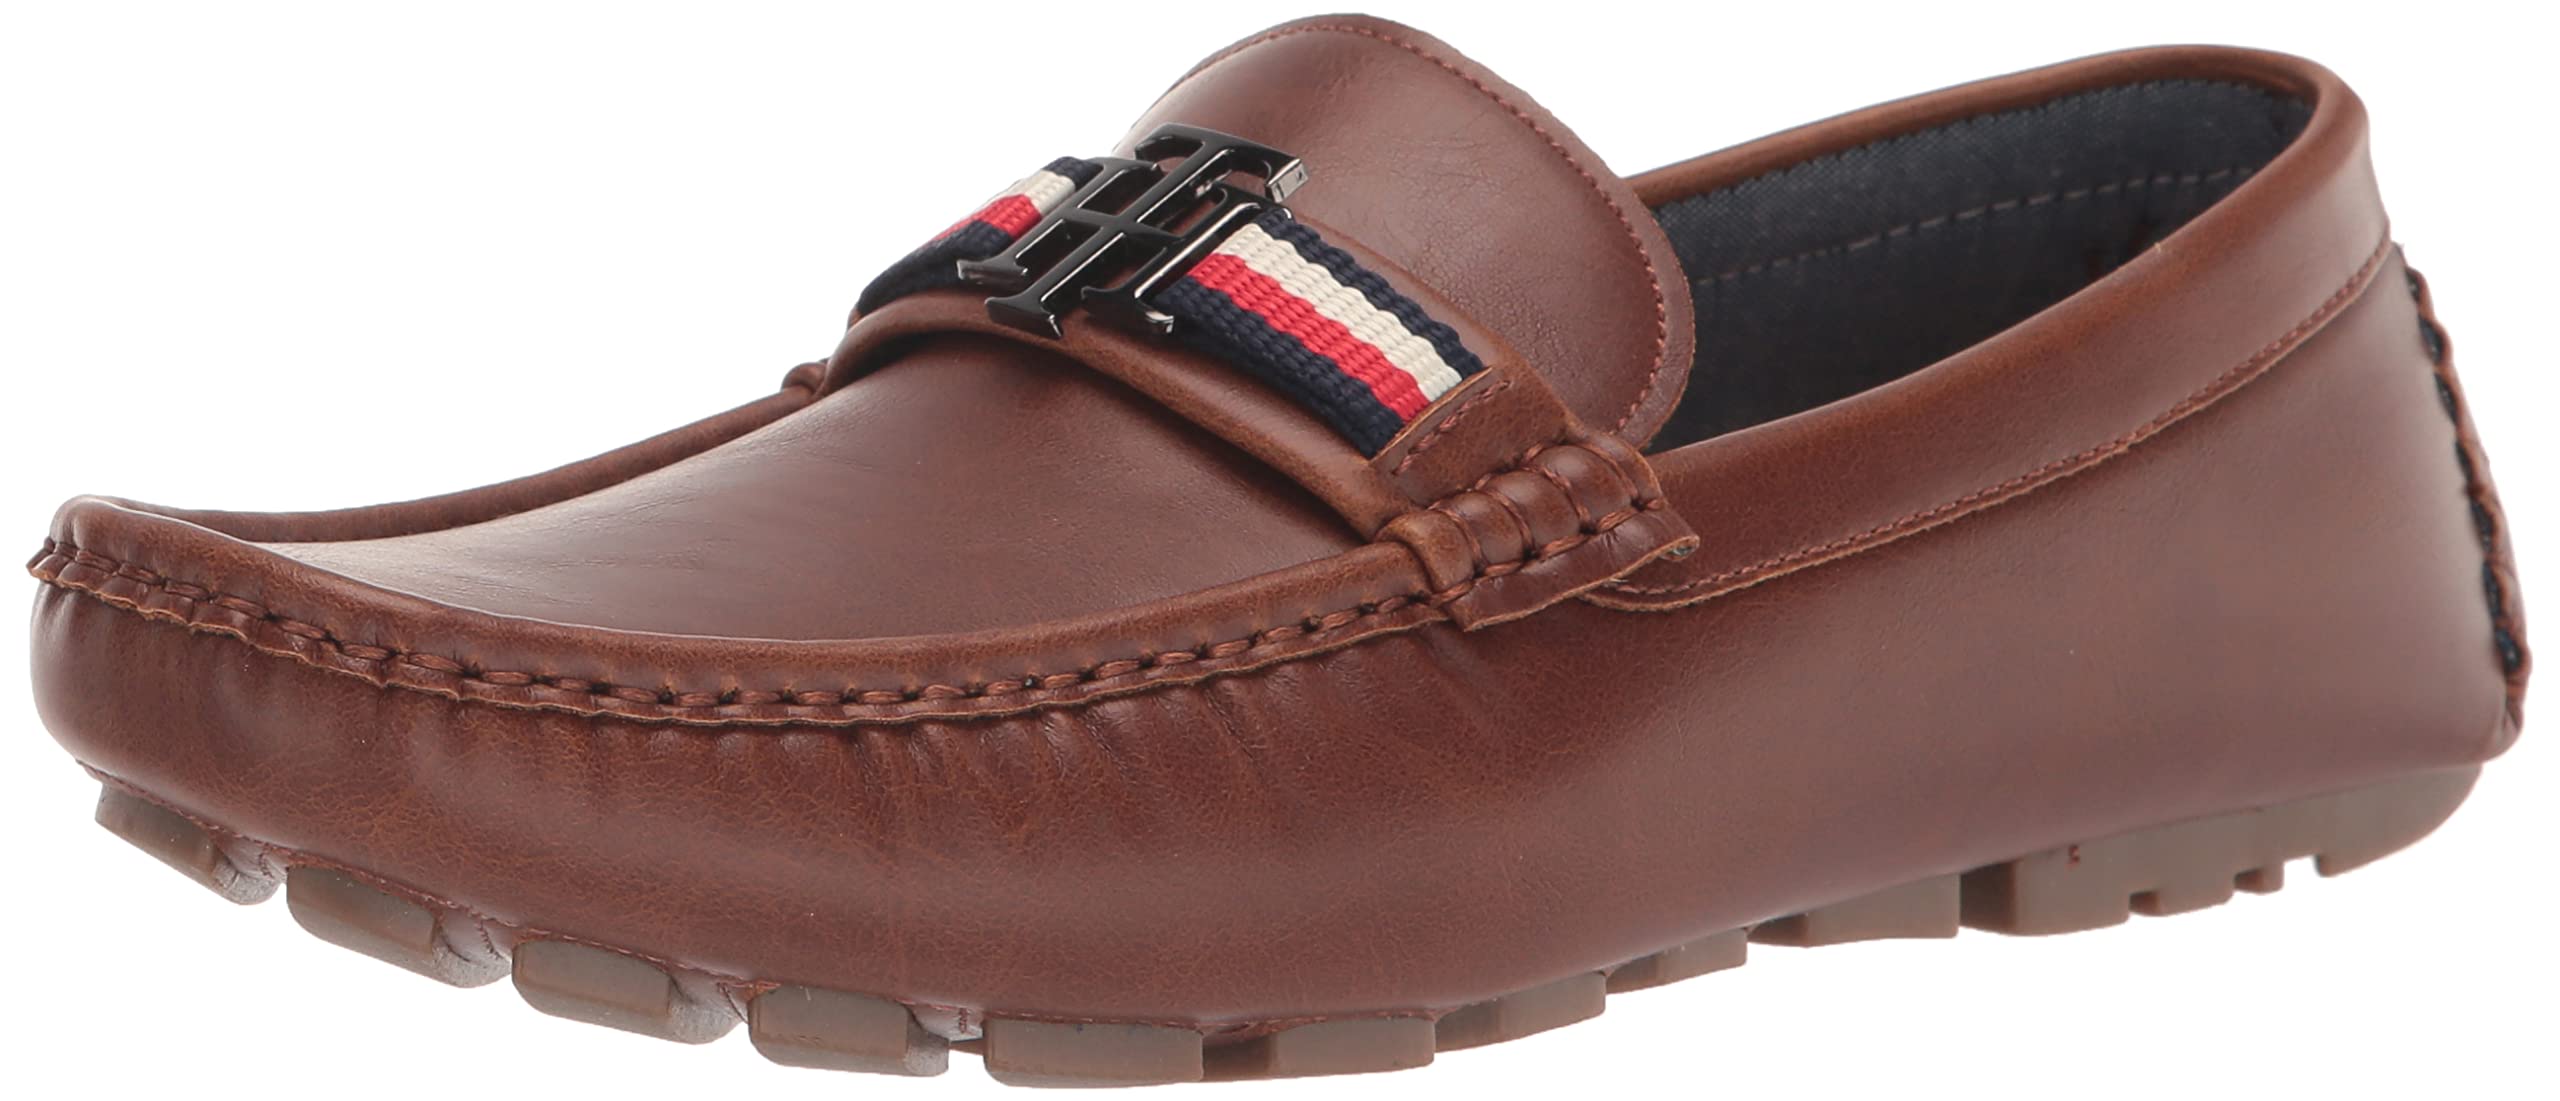 Tommy Hilfiger Men's Atino Driving Style Loafer